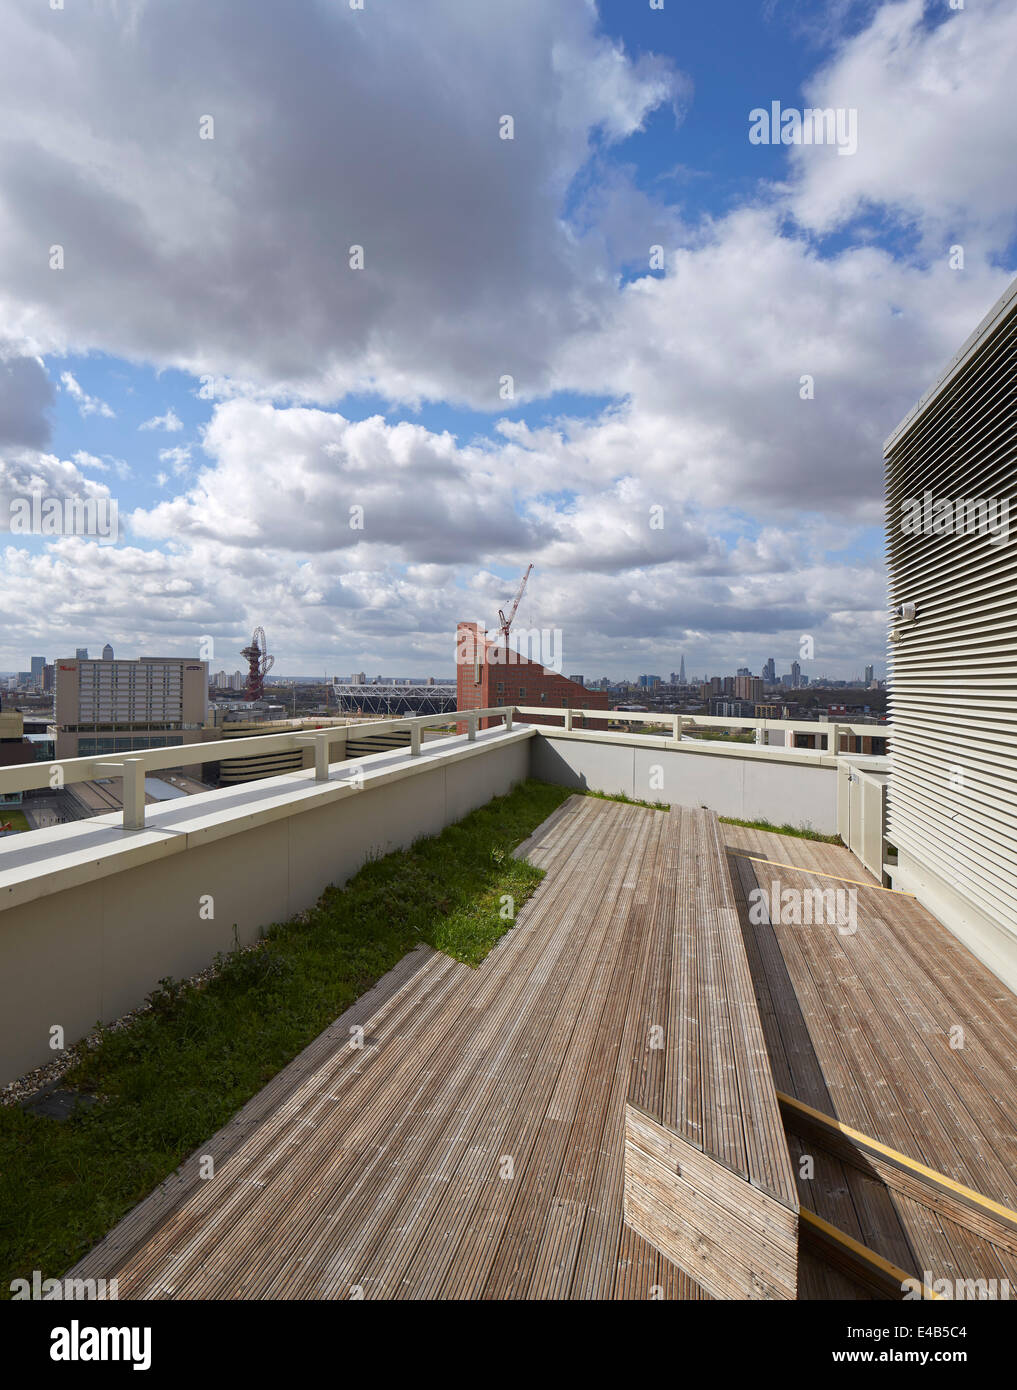 Vesta House, London 2012 Olympic Village, London, United Kingdom.  Architect: DSDHA, 2014. Roof terrace with panoramic view towar Stock Photo  - Alamy